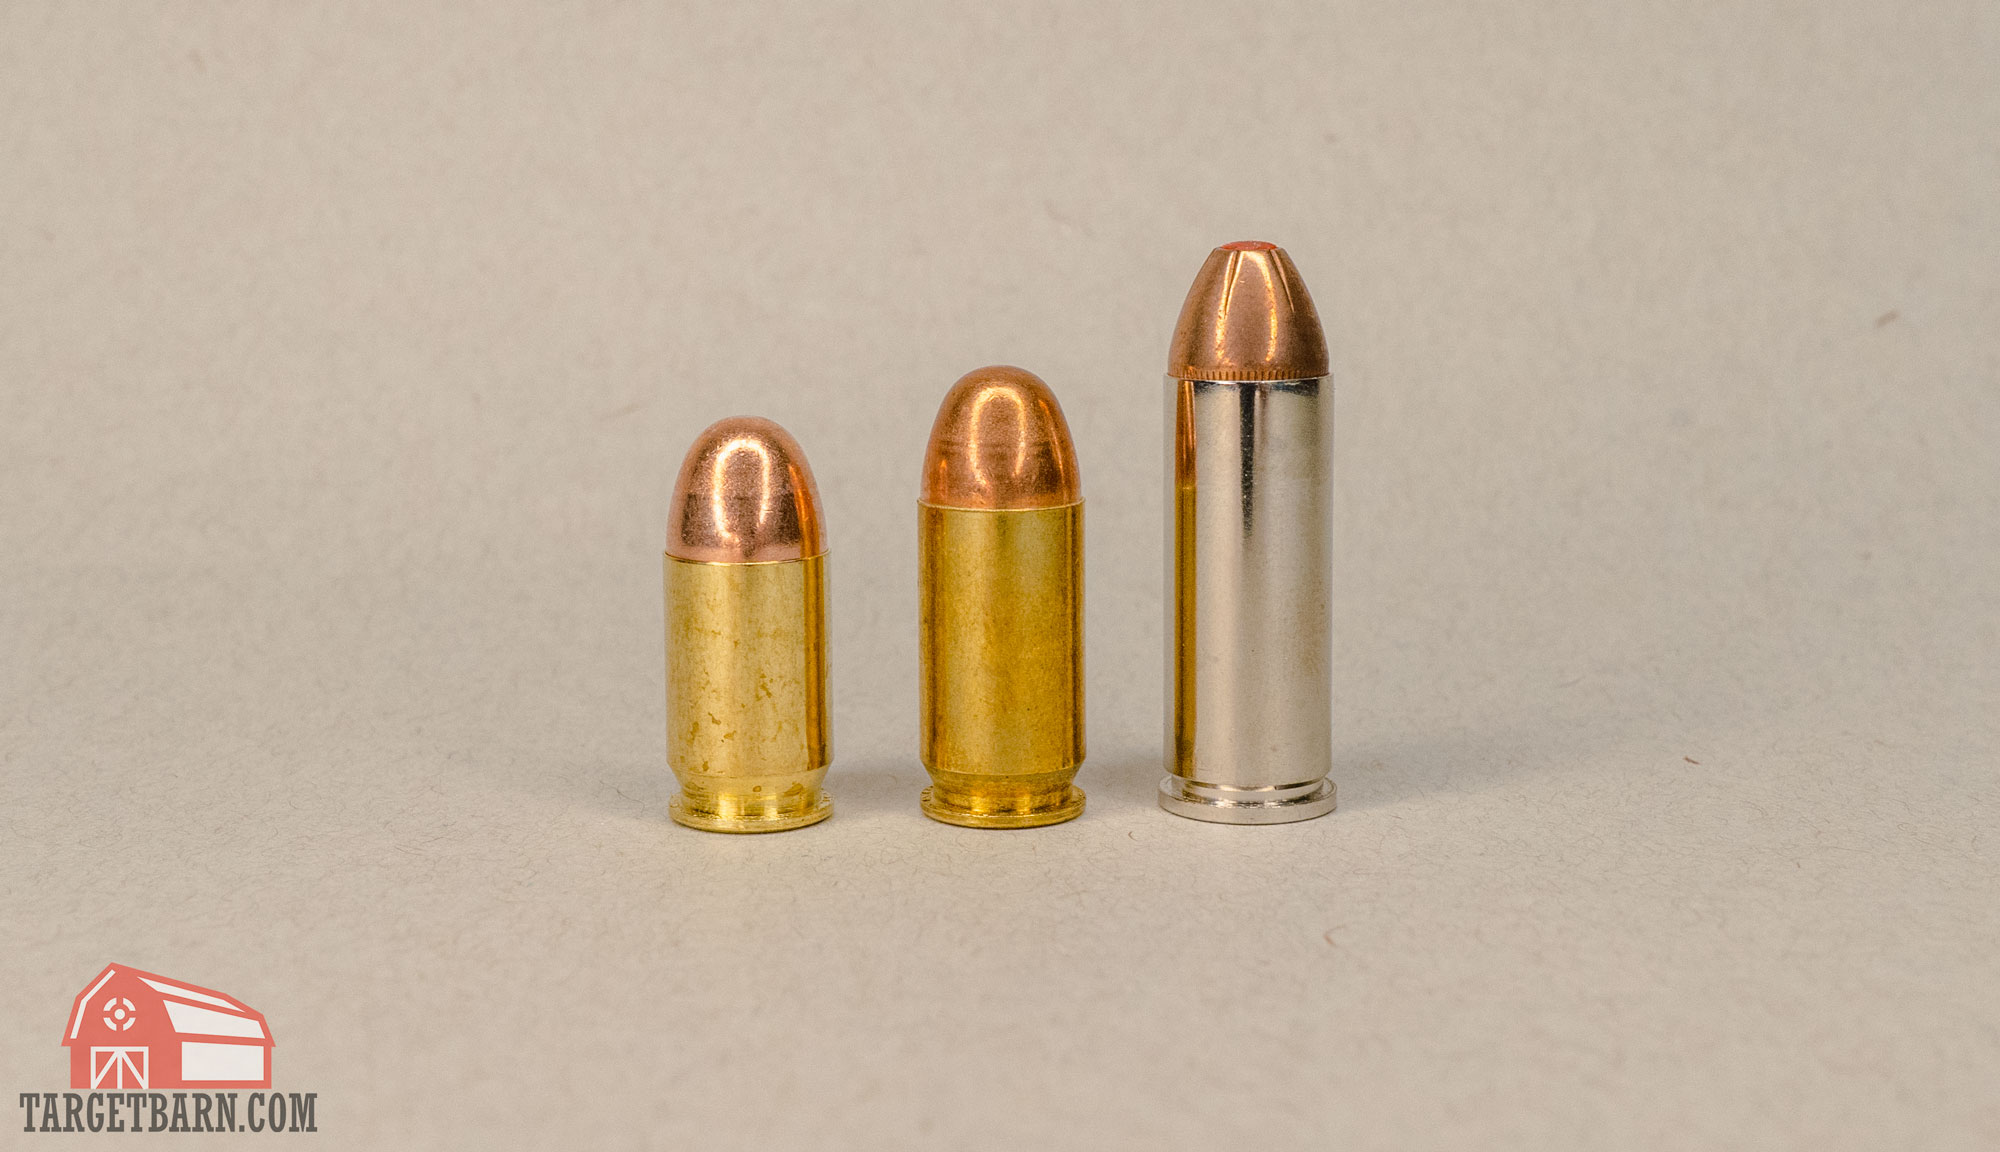 a round of .45 gap, .45 acp, and .45 colt rounds next to each other